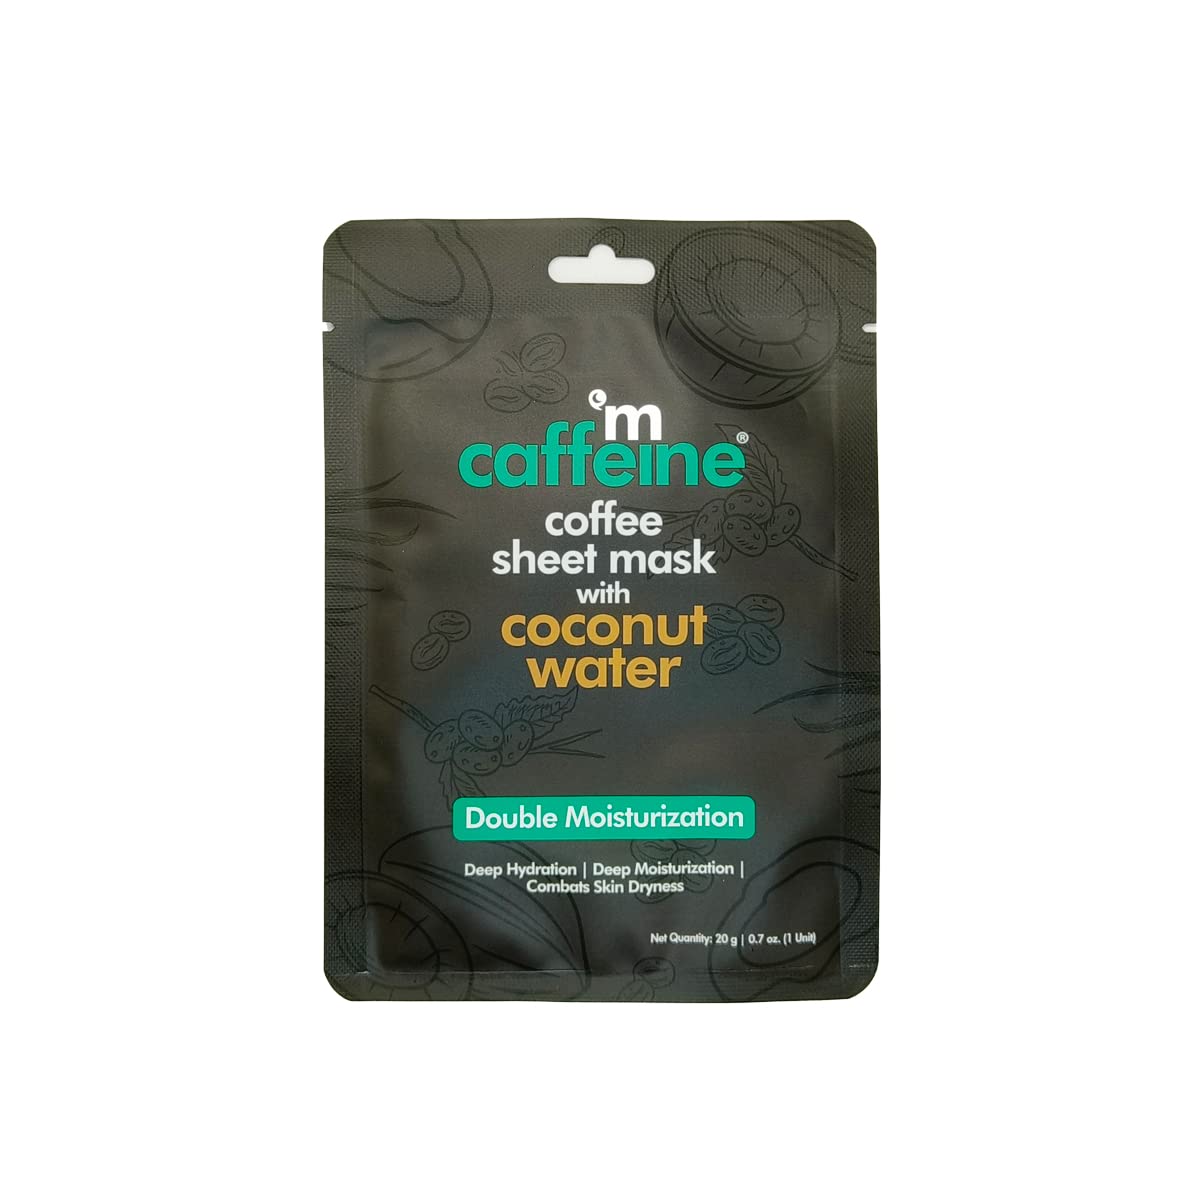 mCaffeine Coffee Sheet Mask with Coconut Water